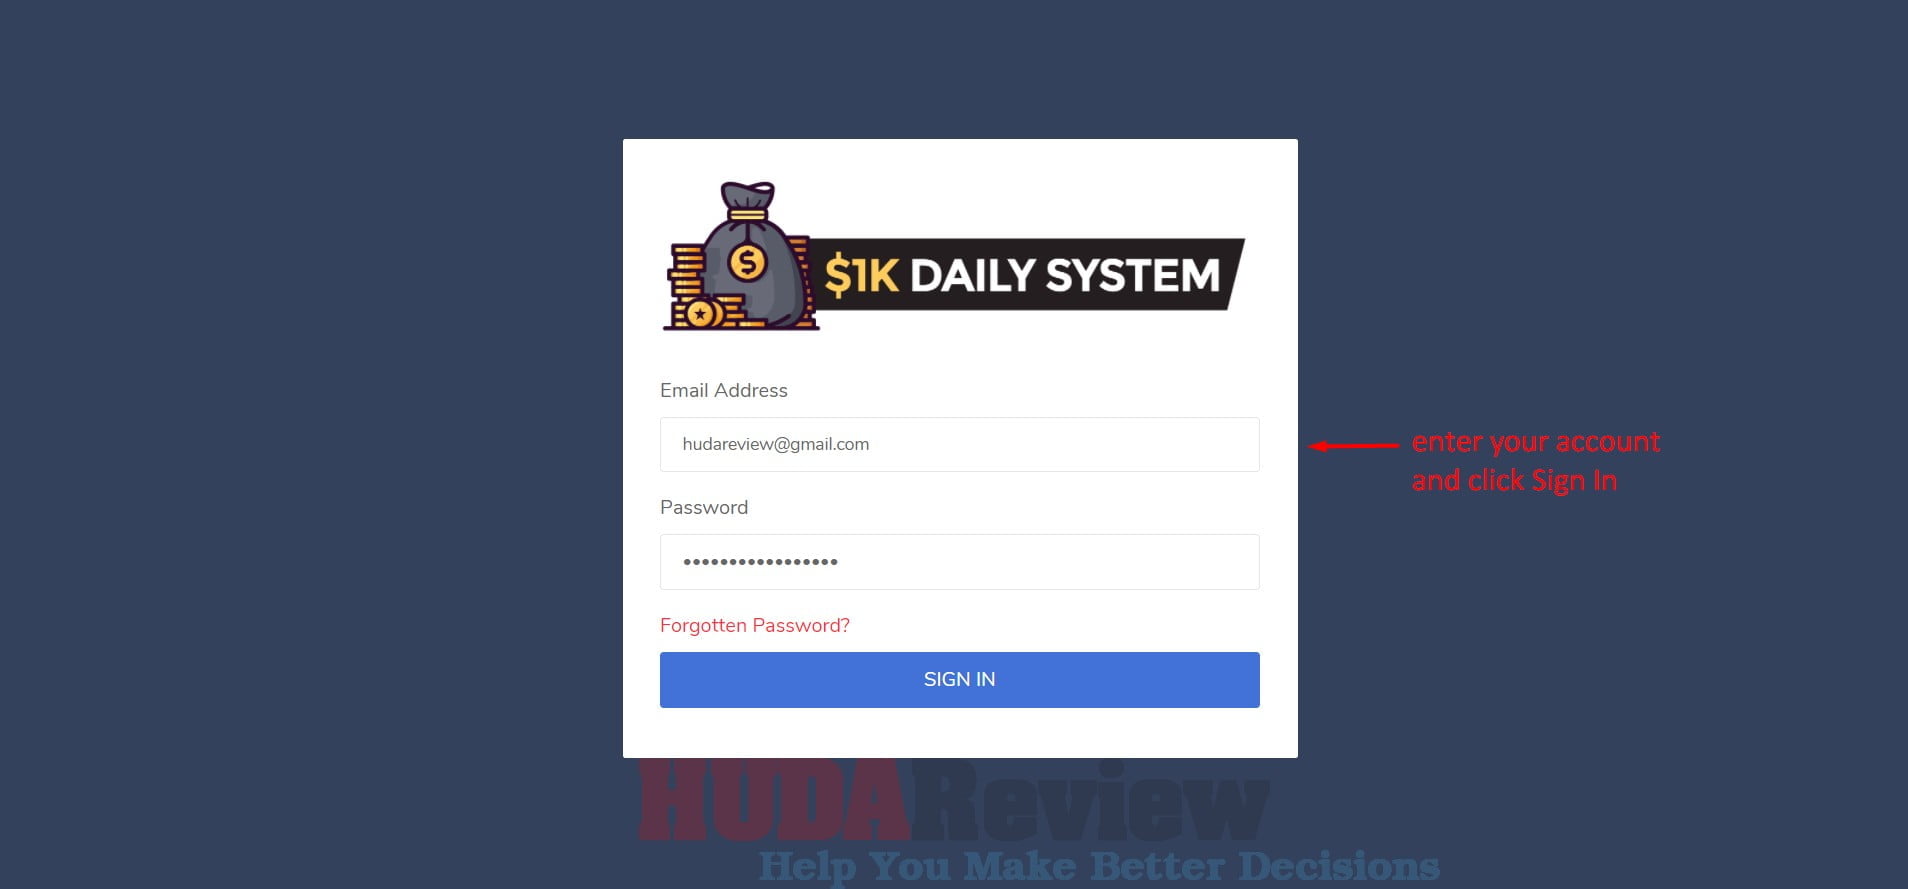 1K-Daily-System-demo-1